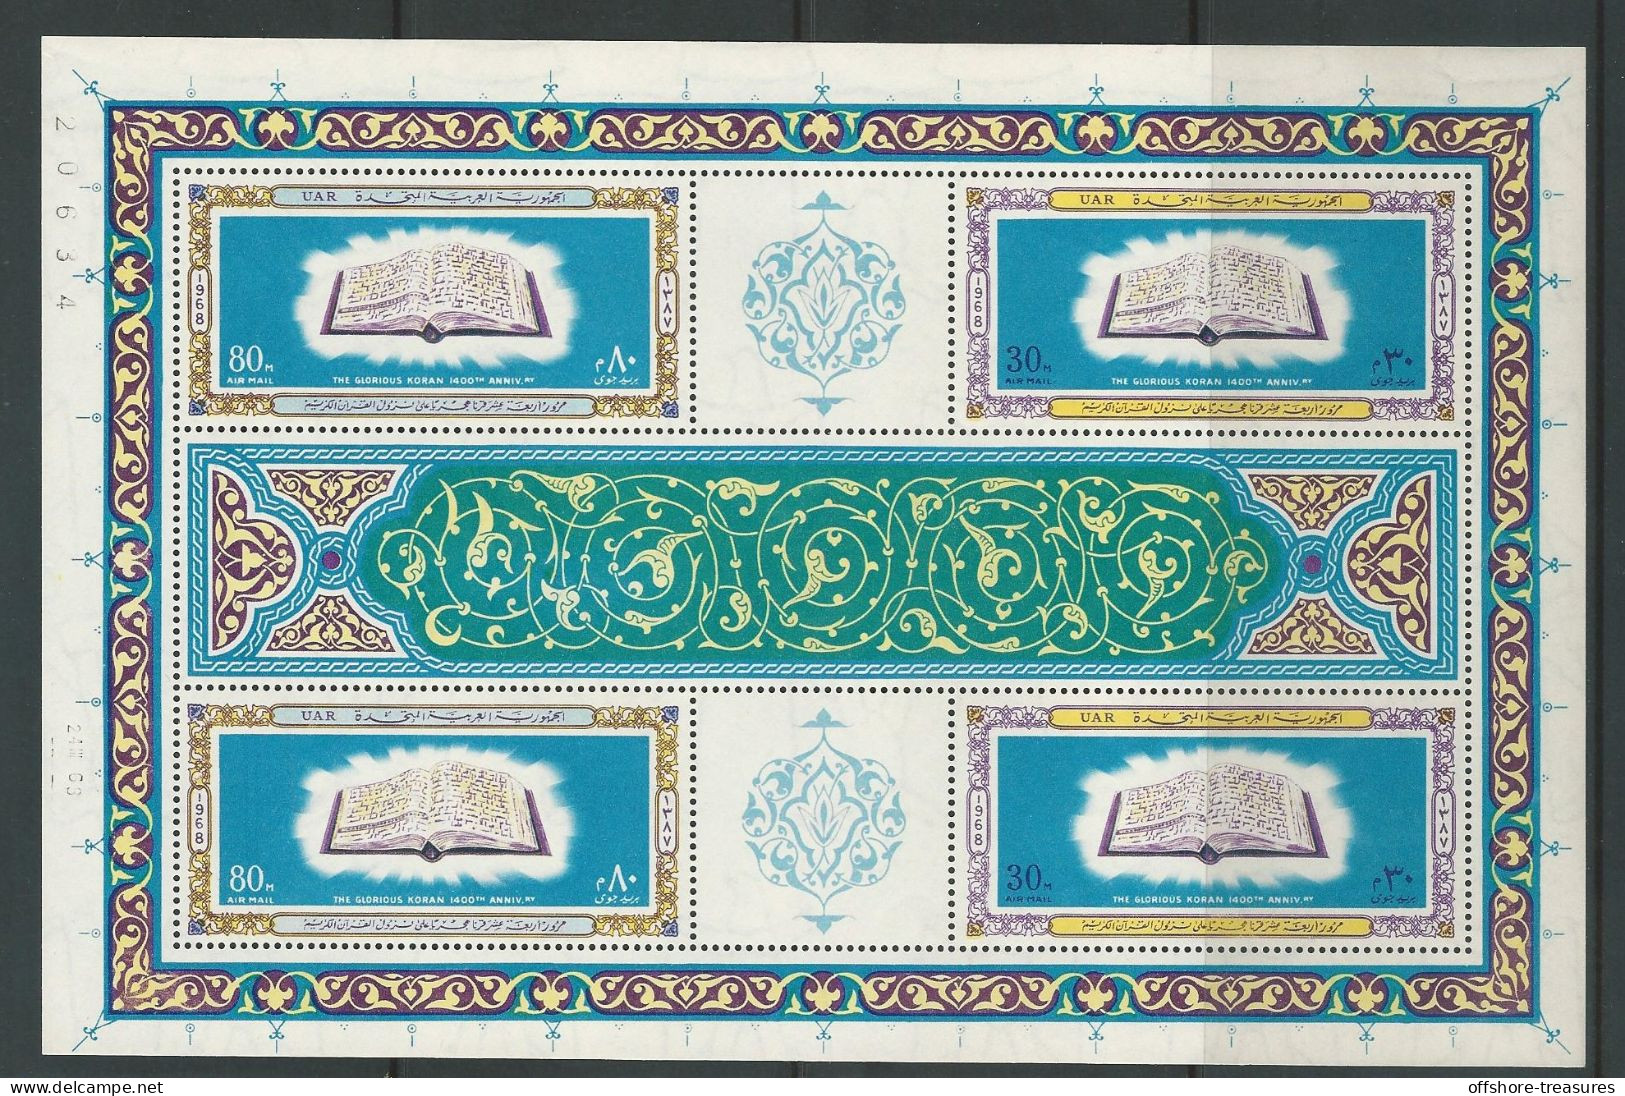 Egypt 1968 1400th Anniversary Of The Holy Koran Sheet-let /Sheet / 2 Stamp Set 80 & 30 Mills Air Mail - Nuovi